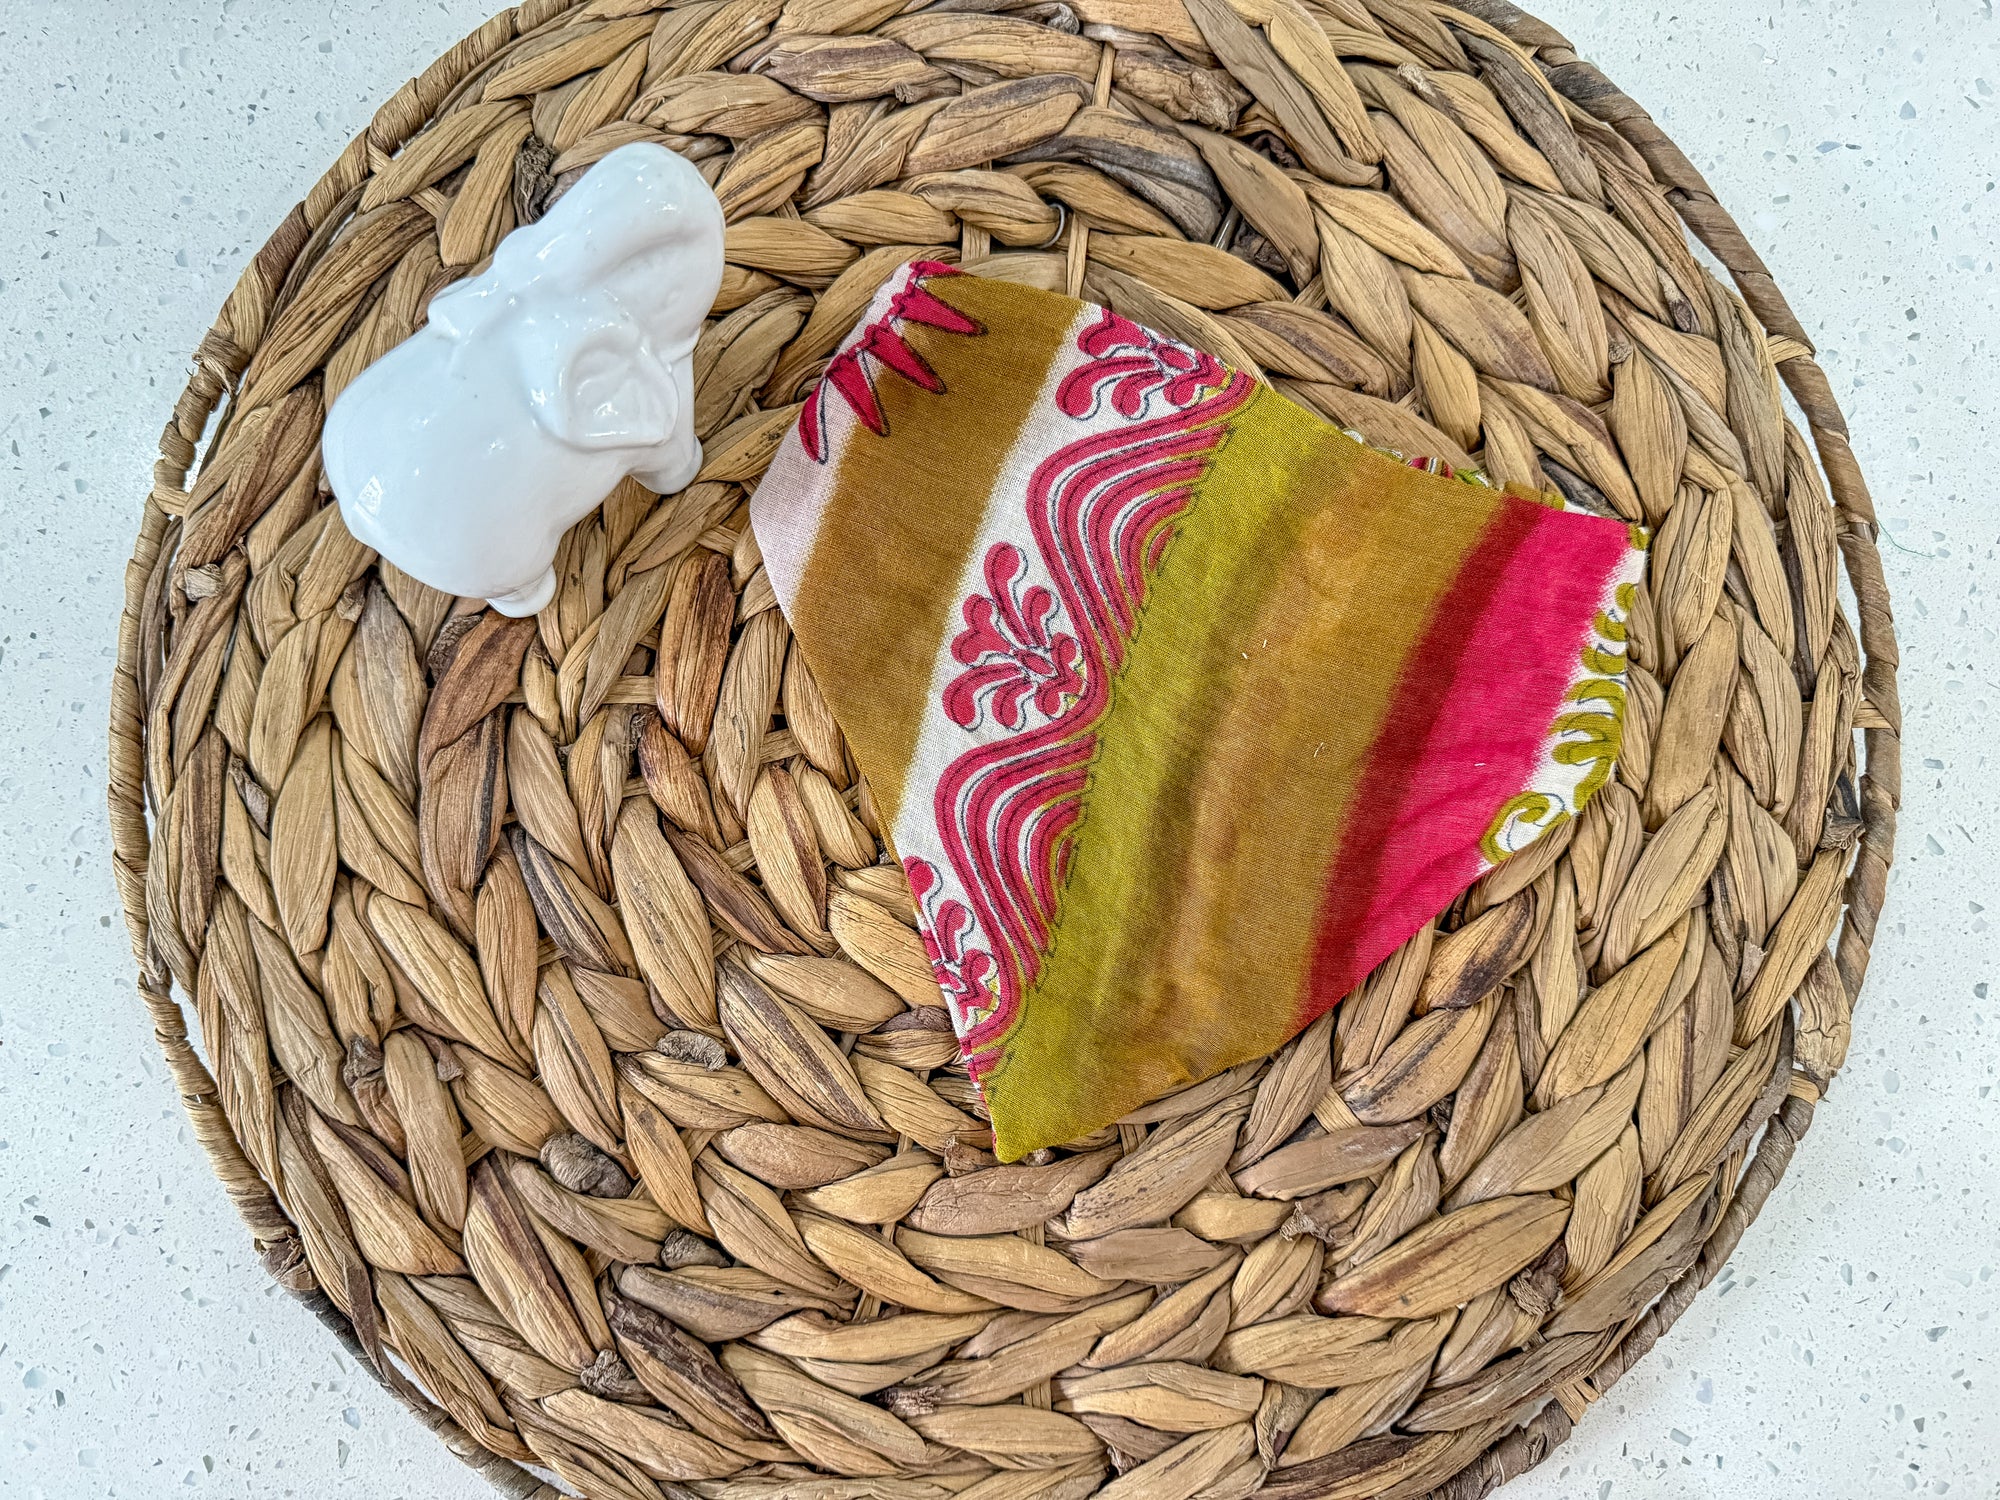 a wicker basket with a cloth on it